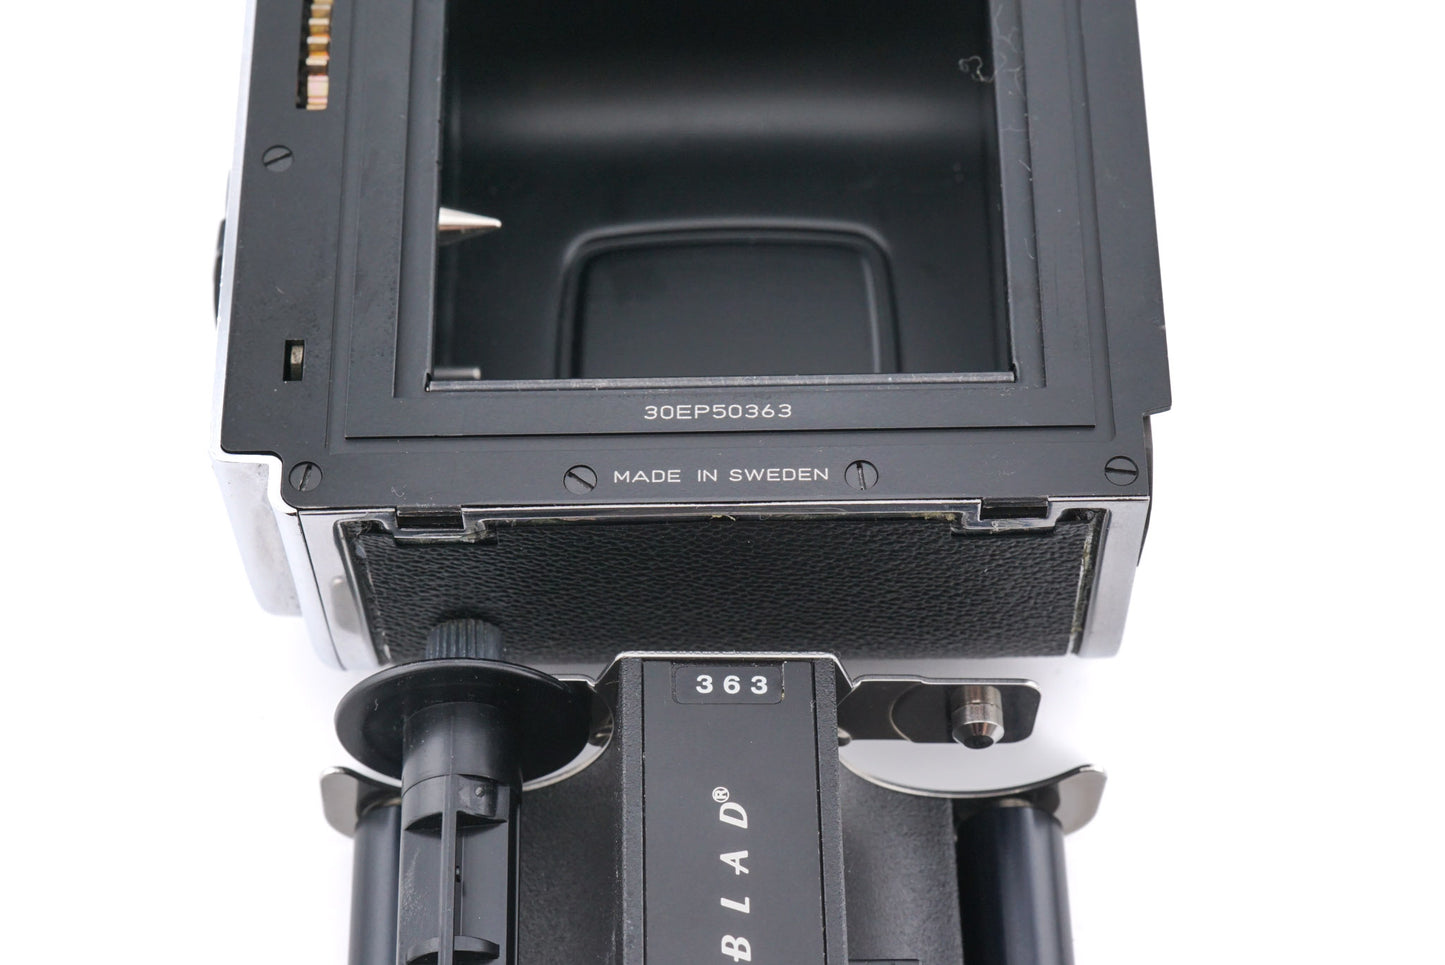 Hasselblad SWC/M + SWC Viewfinder (52035/TISOC) + A12N Film Magazine